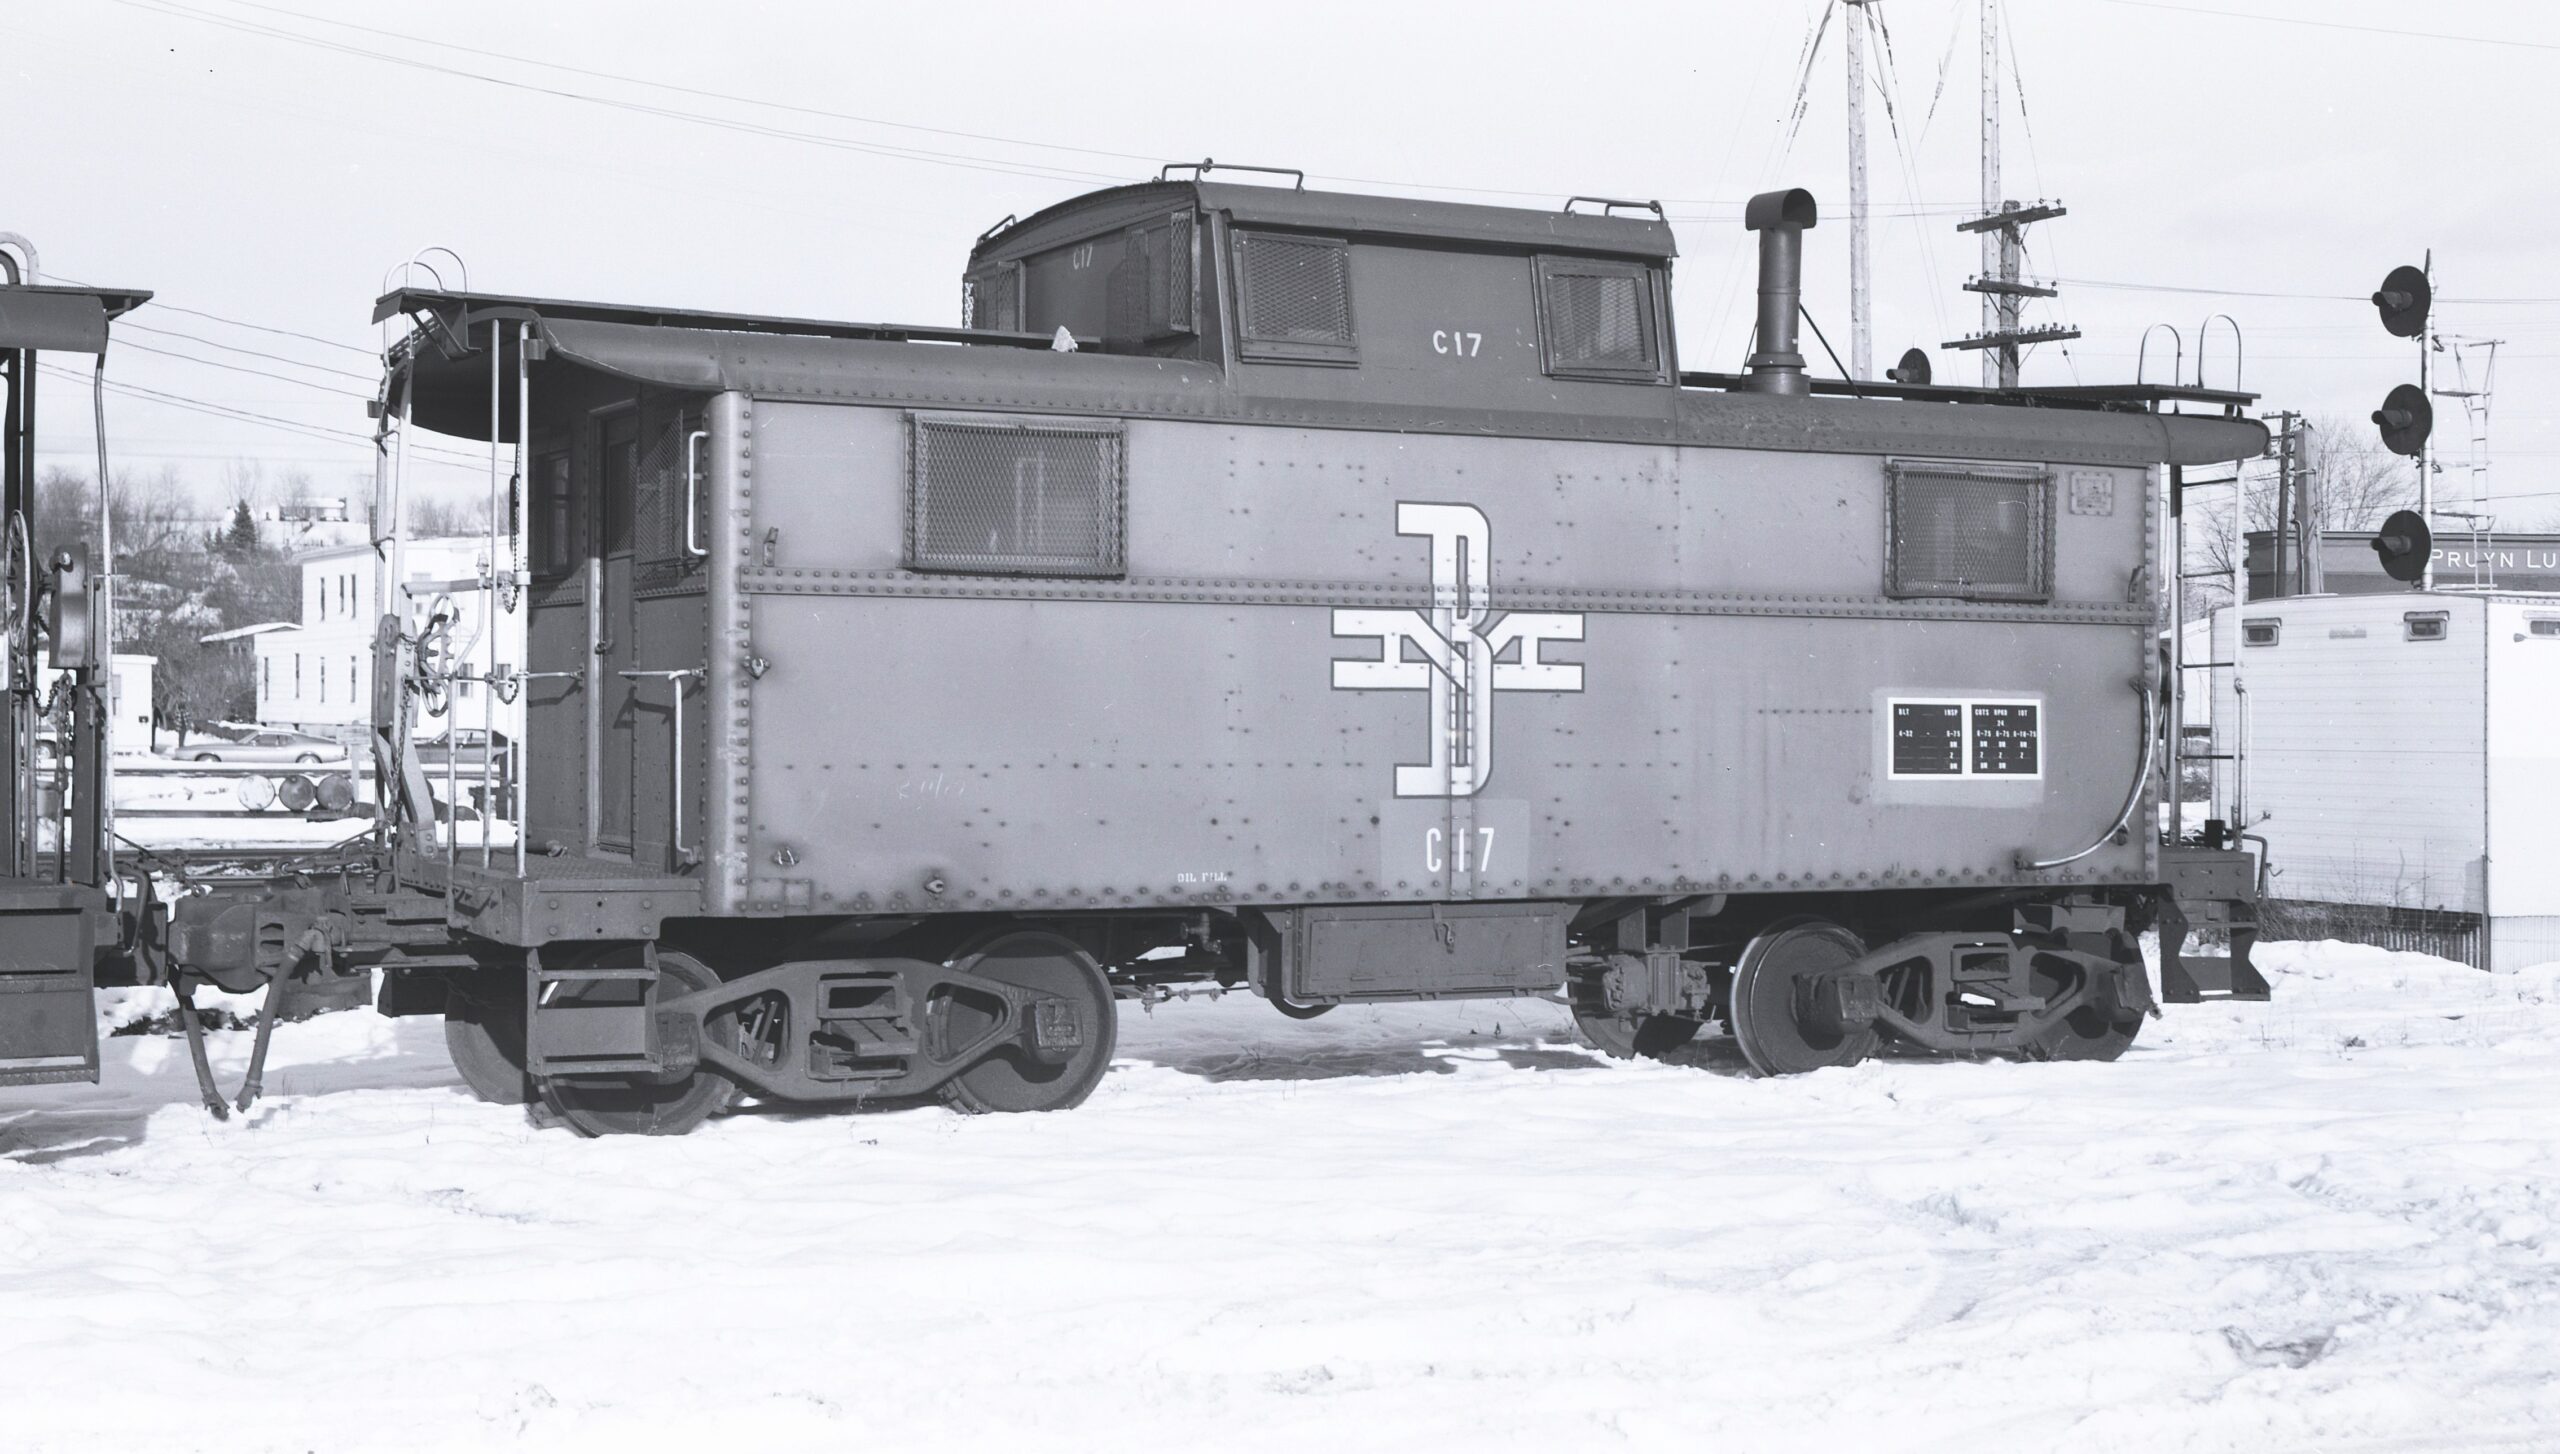 Boston and Maine | Mechanicville, New York | Caboose class N5 #C17 | January 1, 1976